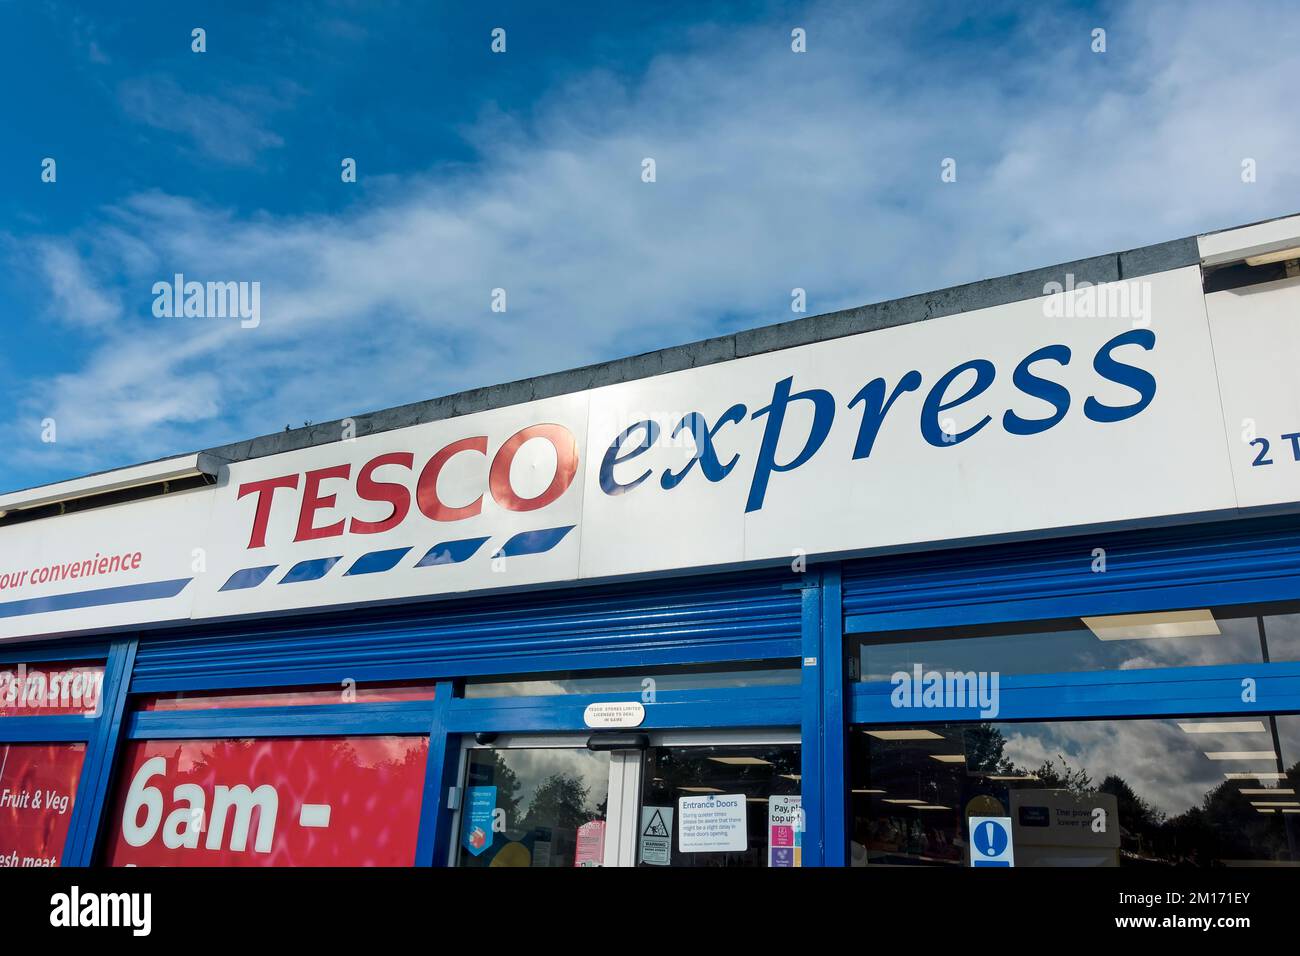 Warminster, Wiltshire, UK - October 5 2021: The Tesco Express Convenience Store at Thornhill Road in Warminster, Wiltshire, England, UK Stock Photo